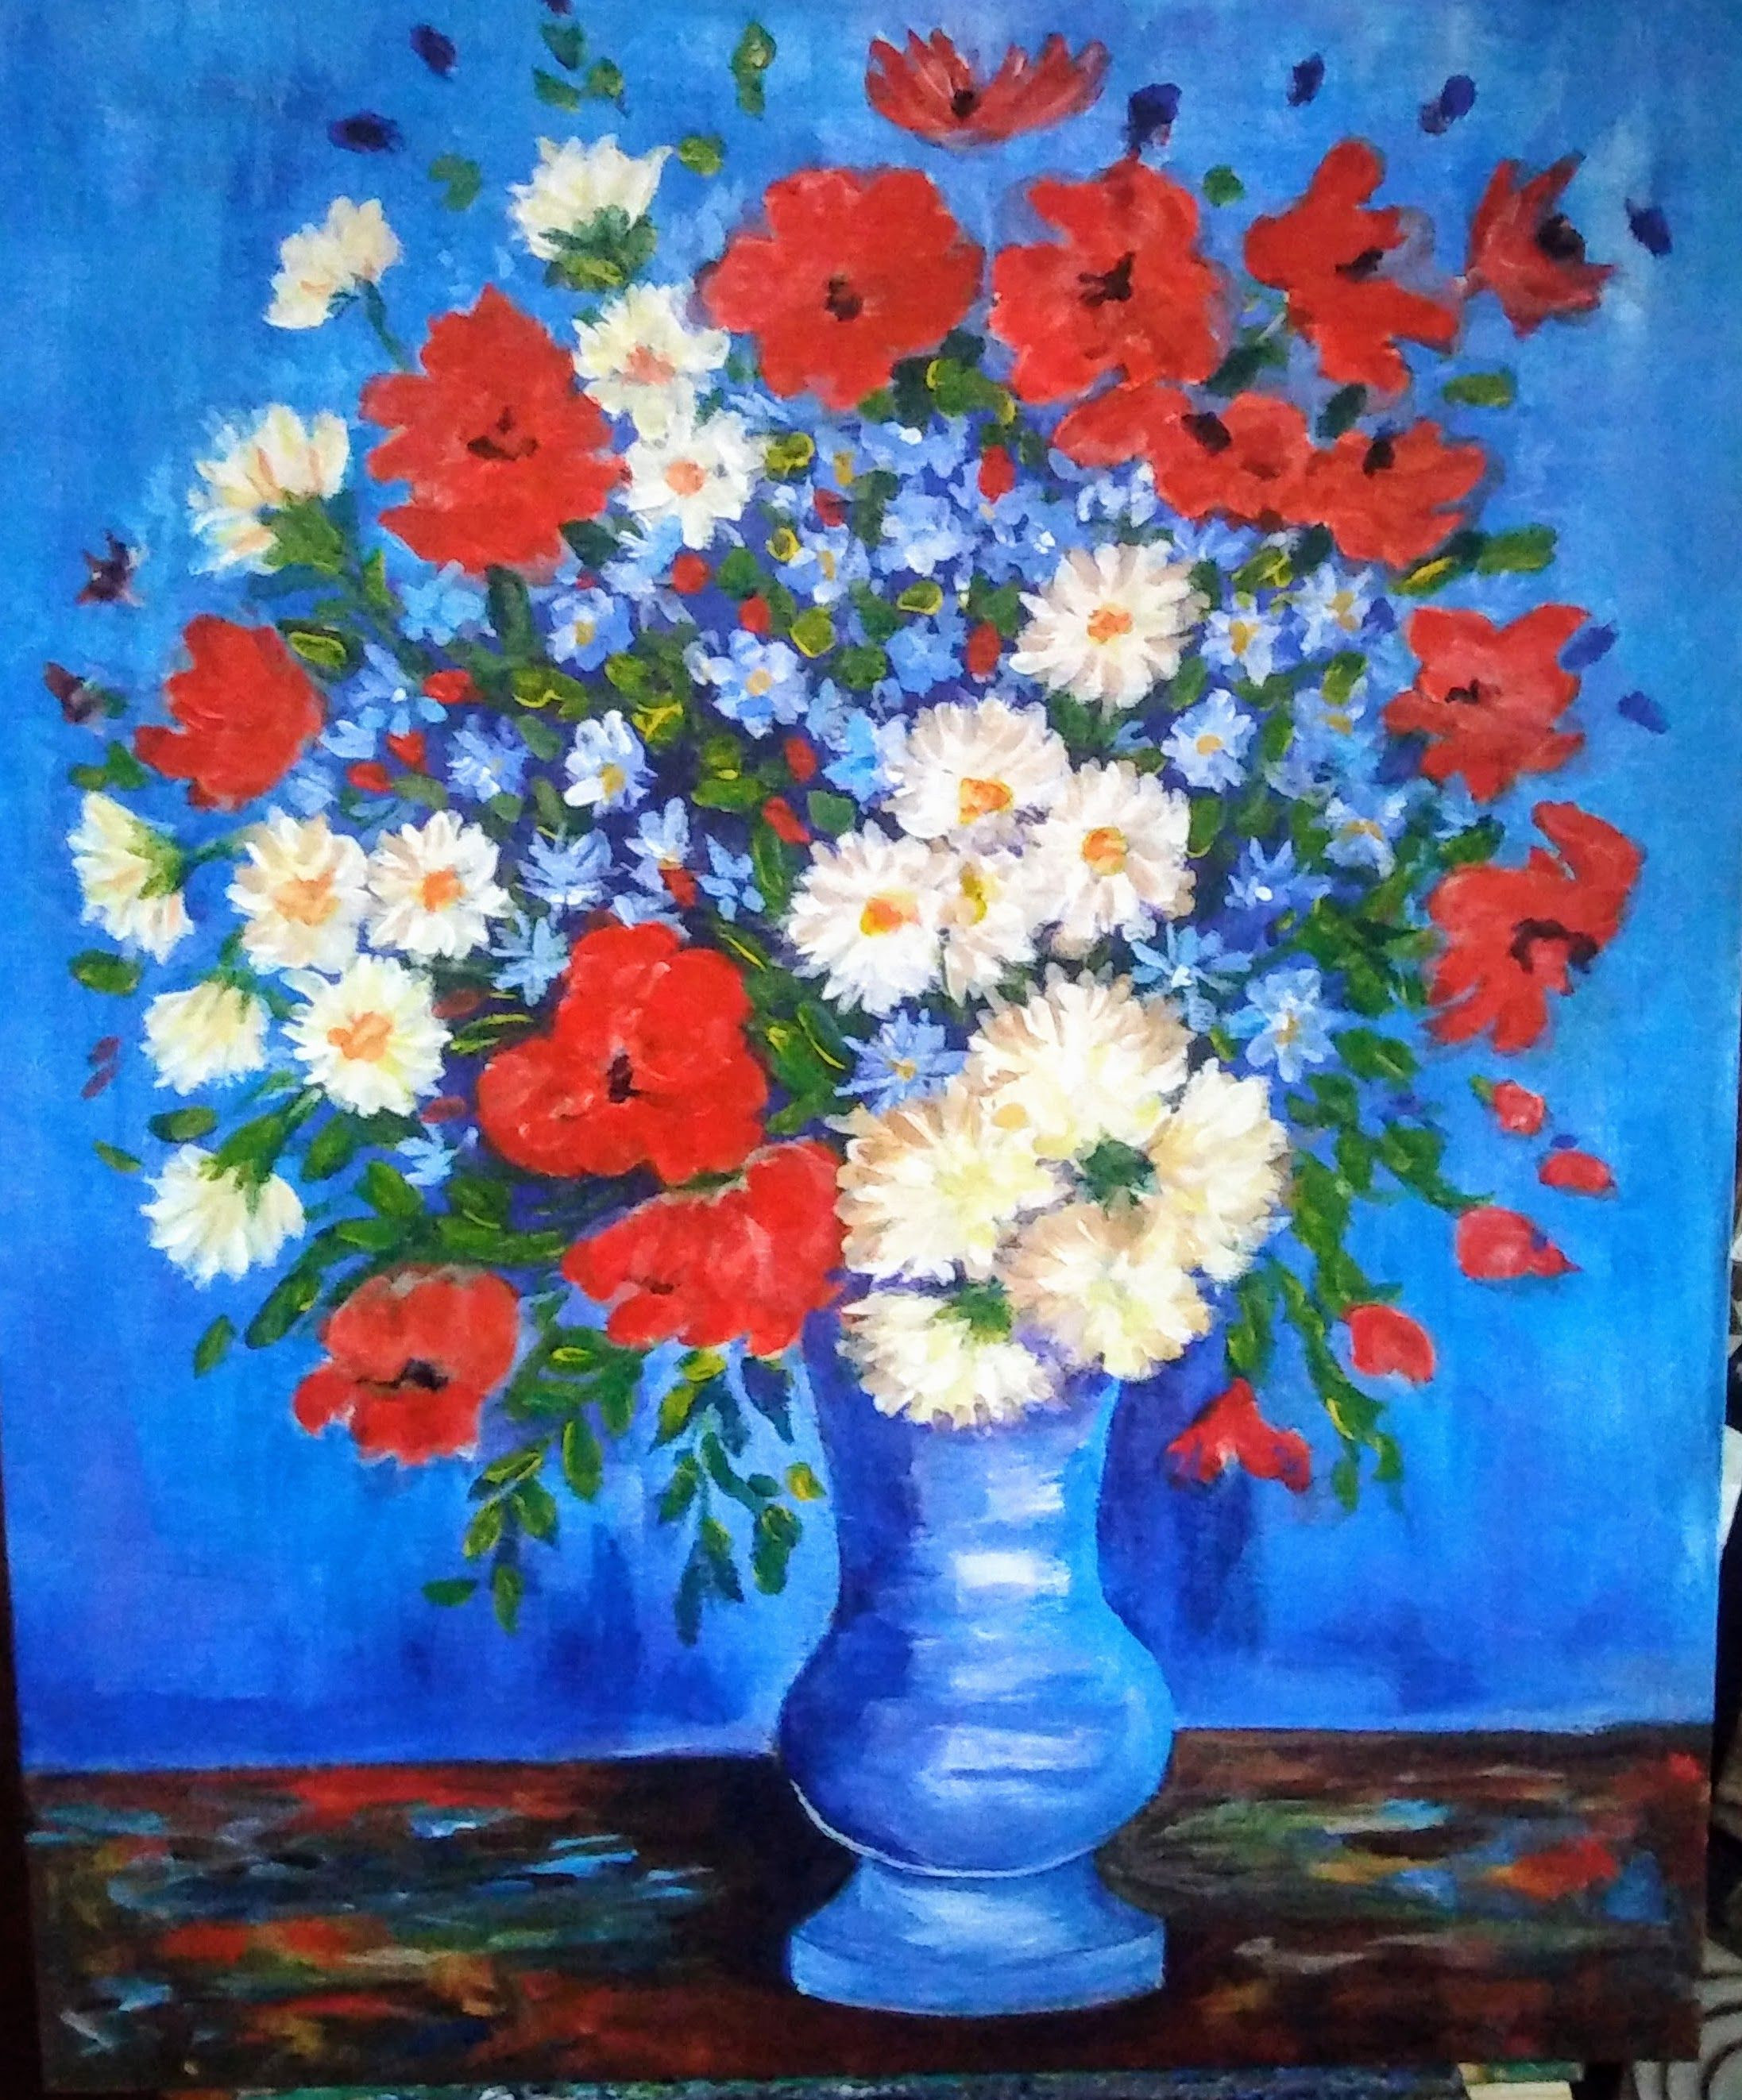 29 Fantastic Van Gogh Poppies Vase 2024 free download van gogh poppies vase of van gogh corn flowers was painted by christine gerst from one of within van gogh corn flowers was painted by christine gerst from one of over 270 lessons we have on 